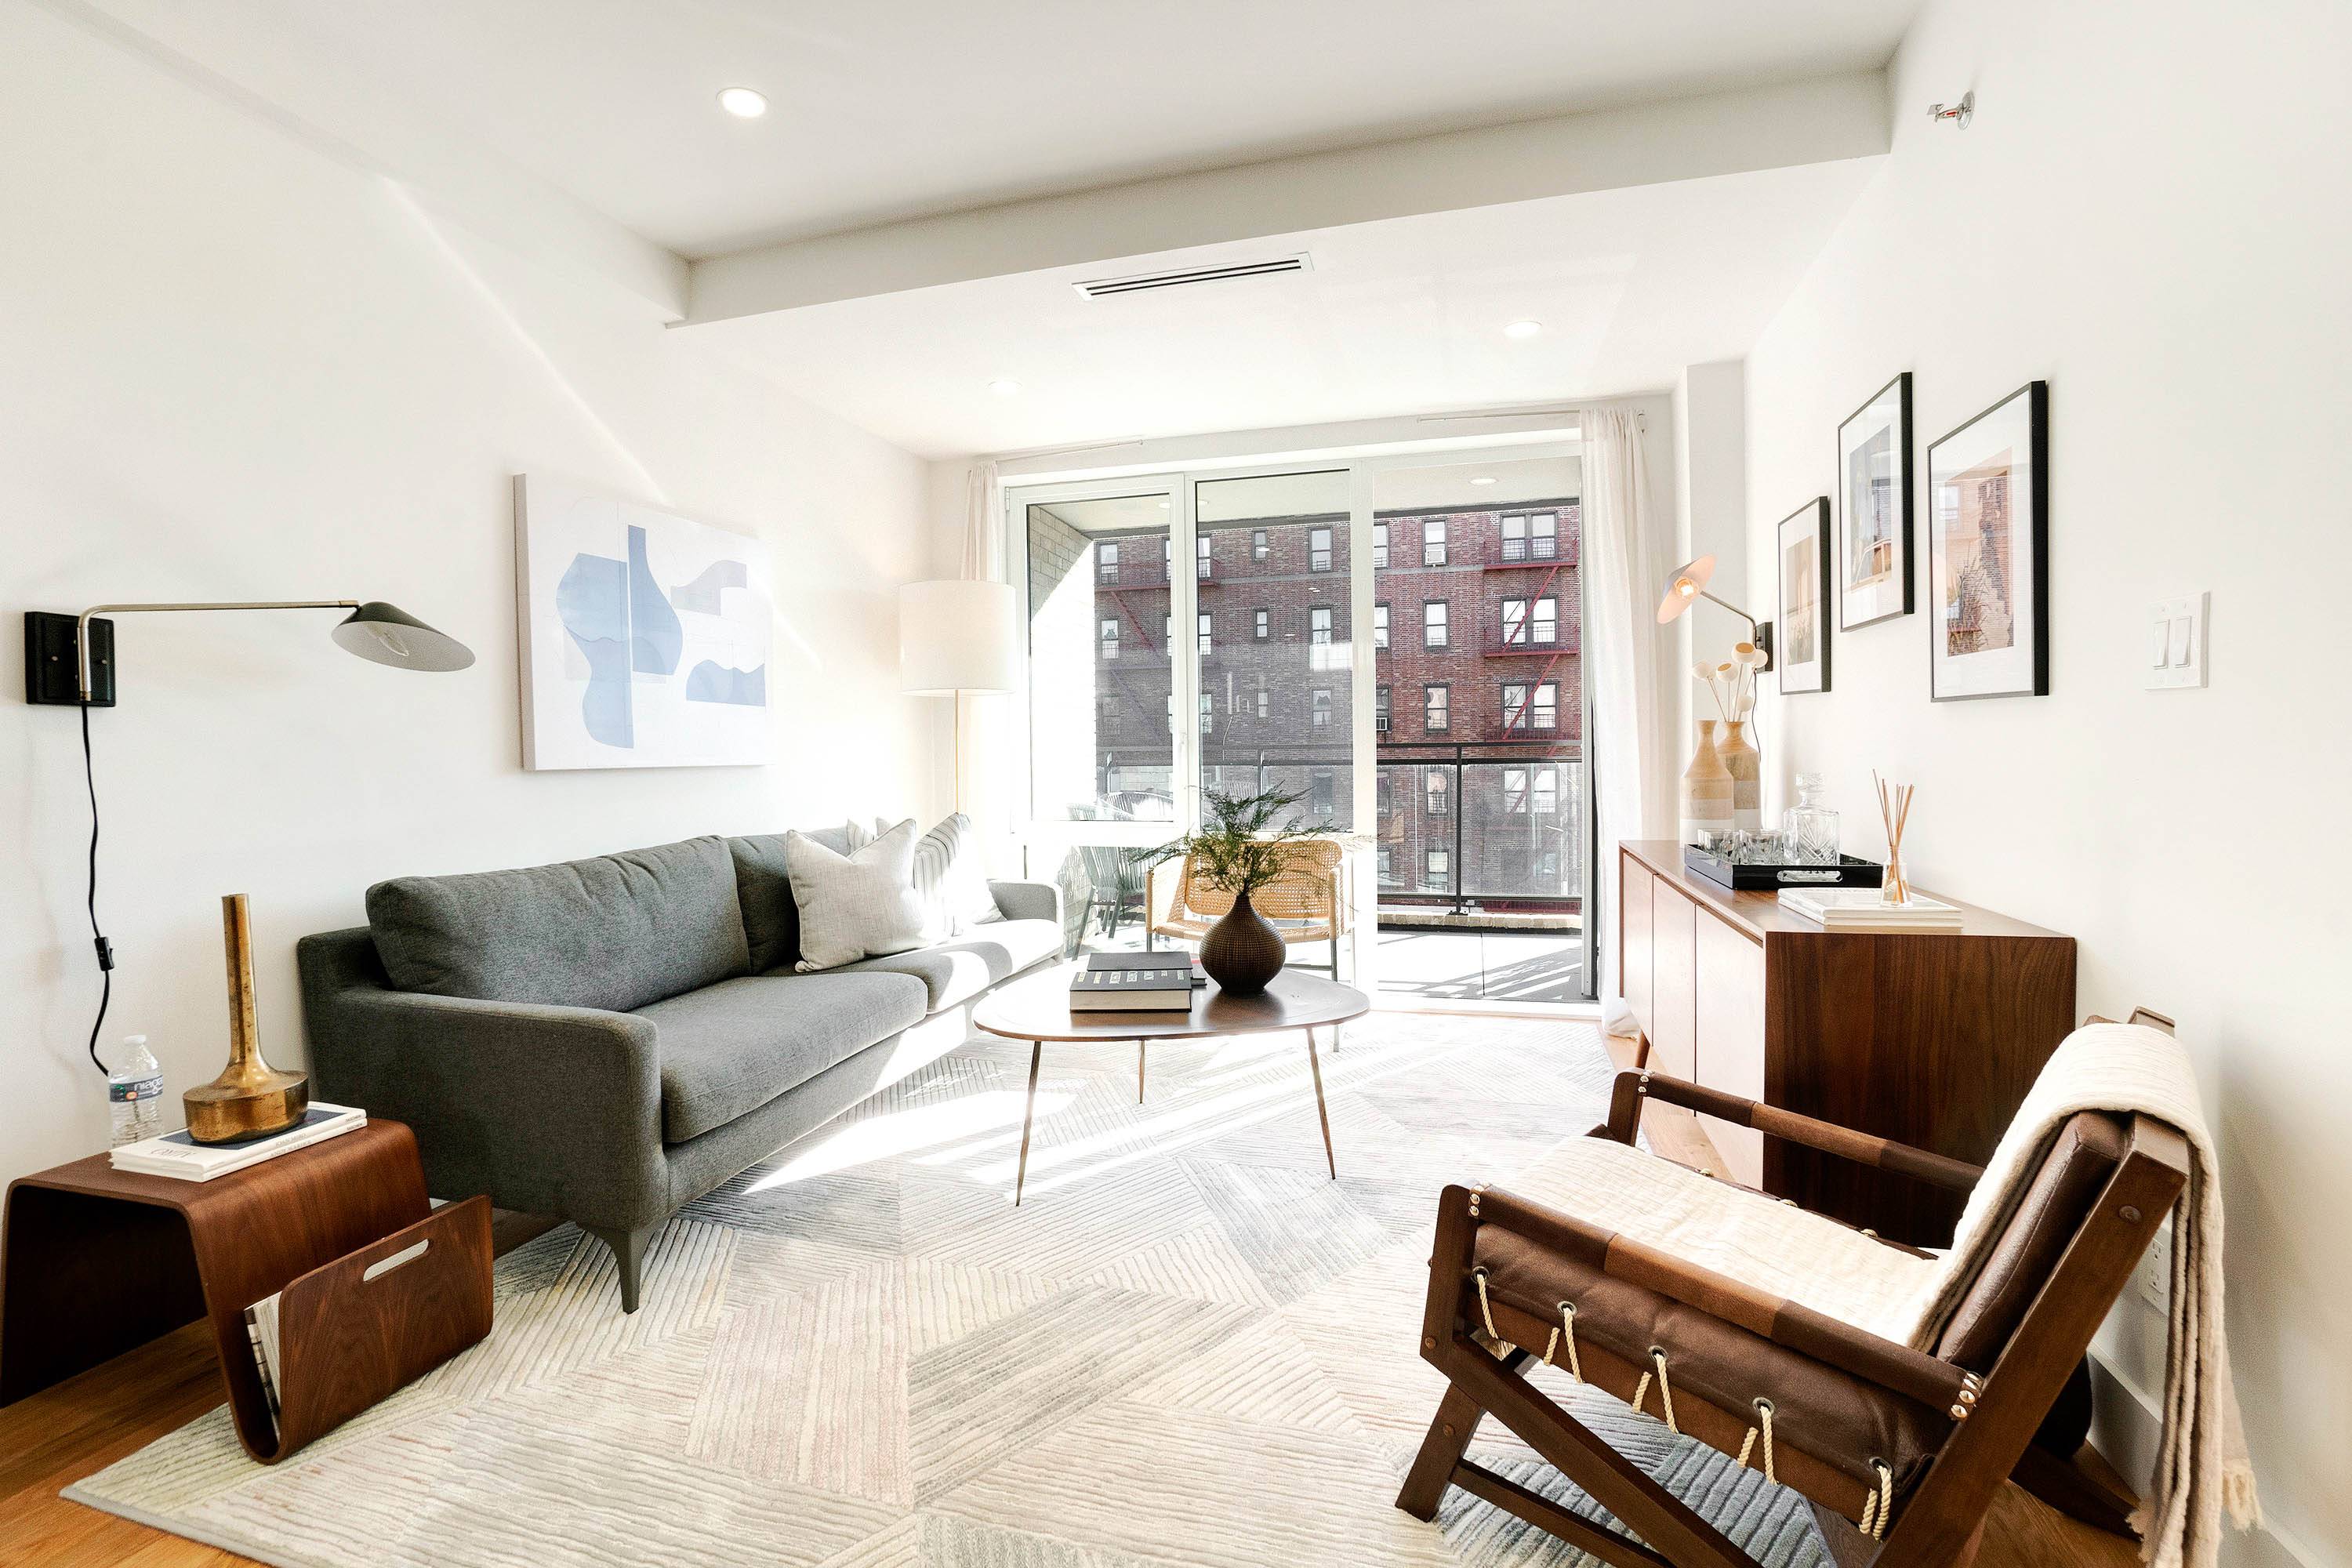 No Fee 2 Bed 1 Bath The Cambridge located at 2155 Caton Ave is a finely detailed 30 unit boutique rental building in Prospect Lefferts Garden, Brooklyn.